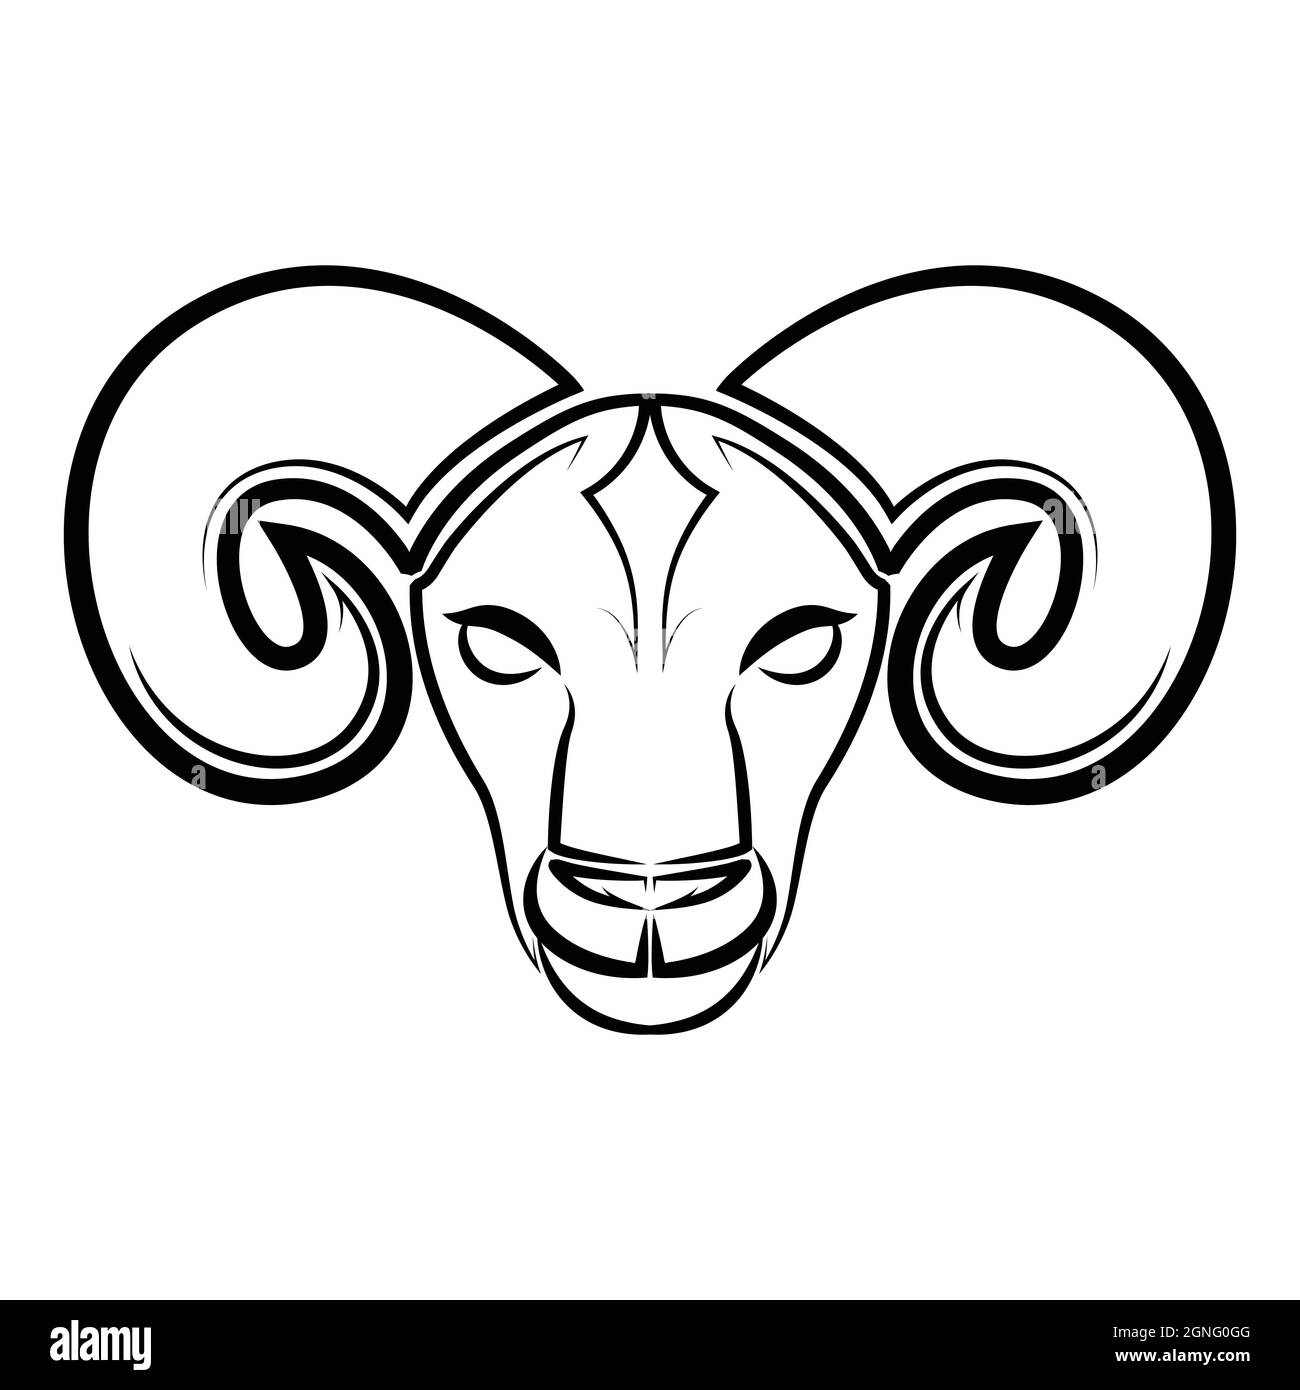 Black and white line art of sheep head. Good use for symbol, mascot ...